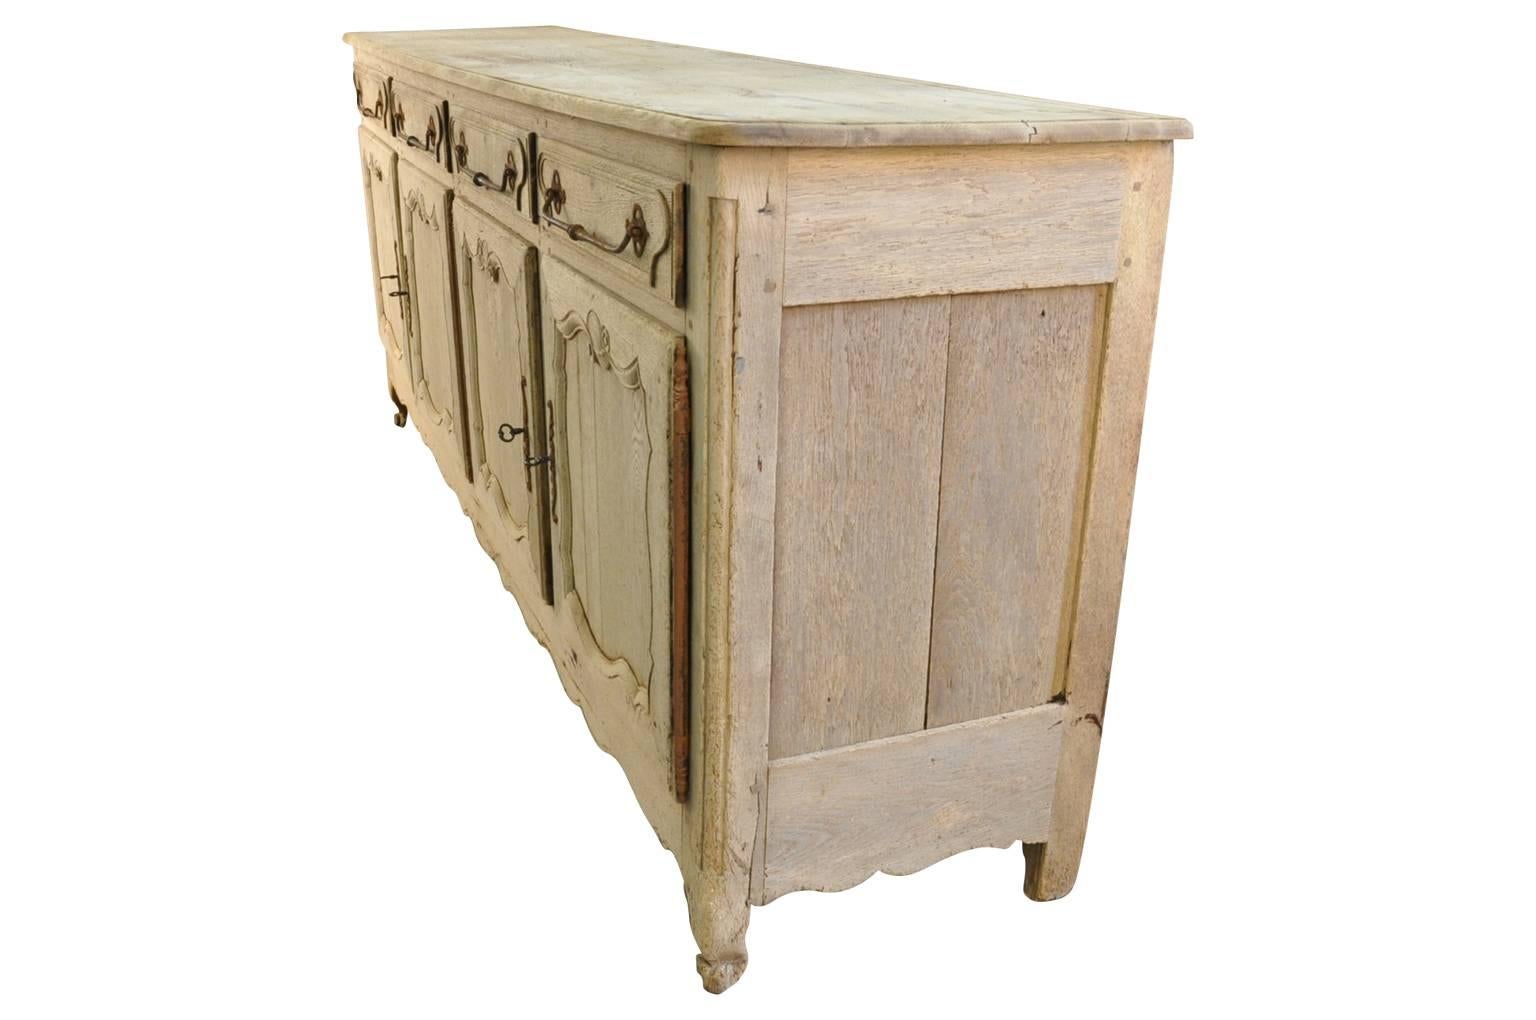 Bleached 19th Century French Provencal Buffet or Enfilade